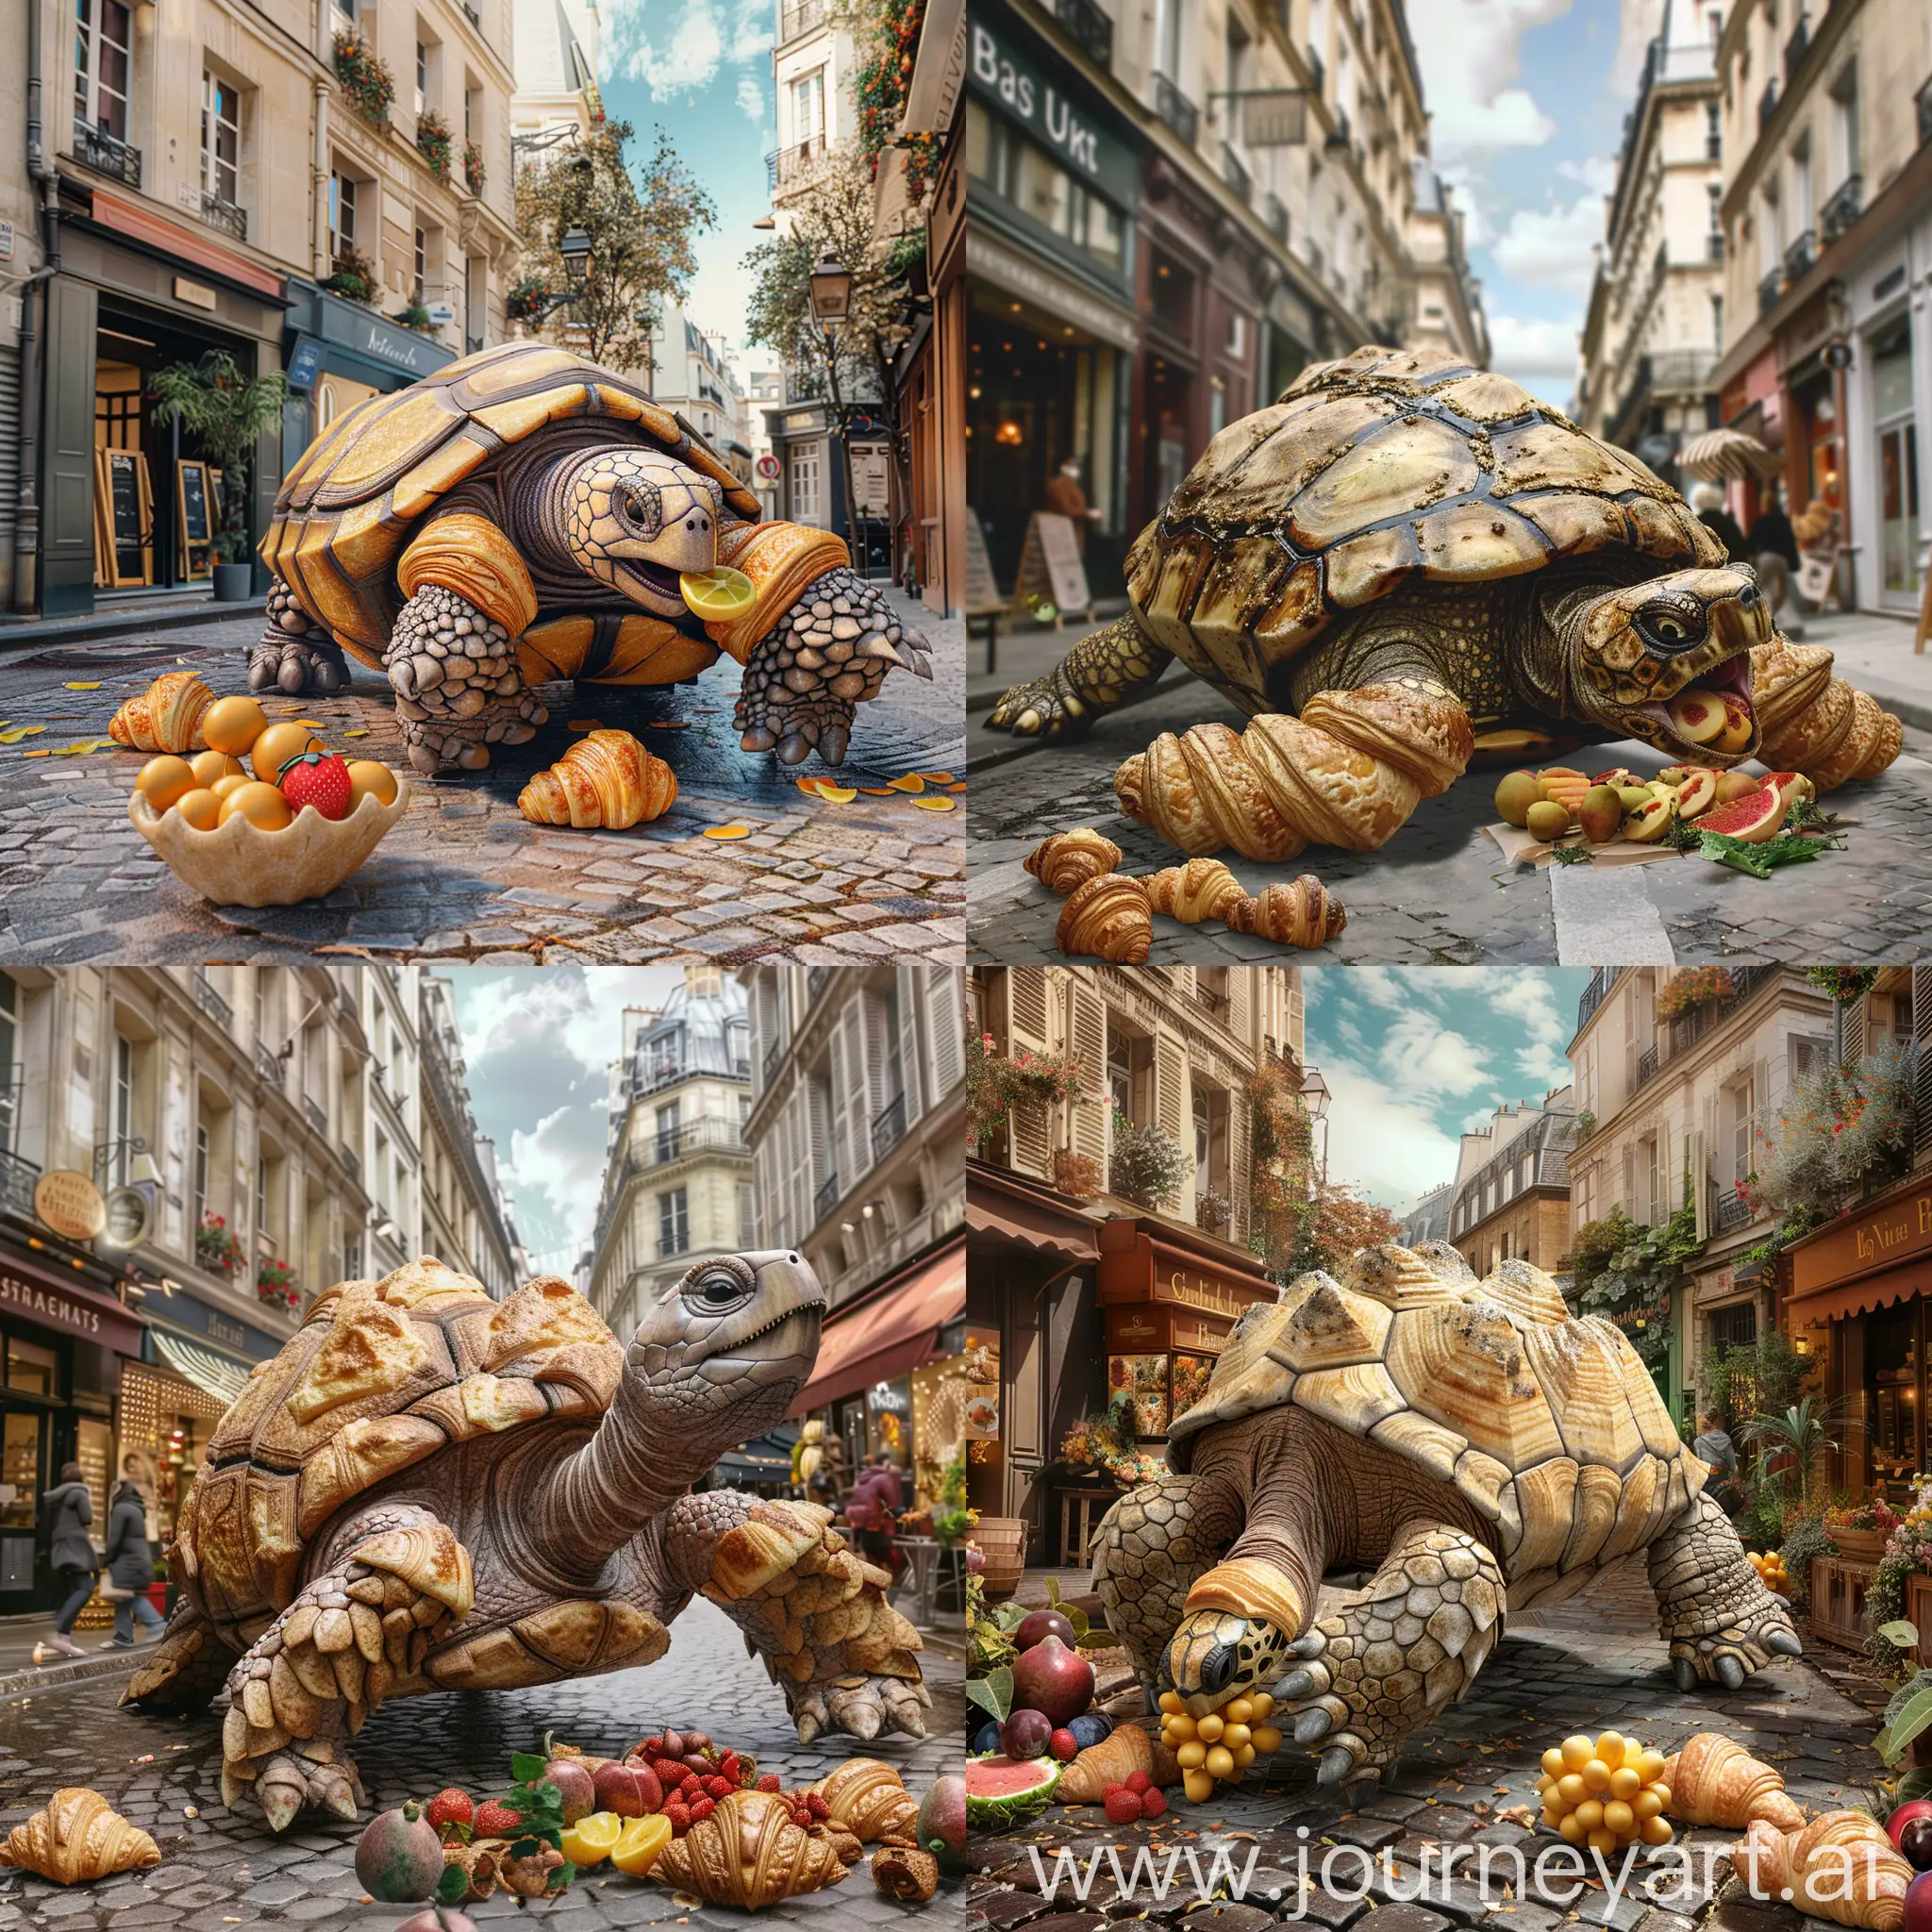 A realistic giant turtle with skin and shell made of the texture of croissants, eating pastry fruit in a street of Paris with hints of Jurassic park.